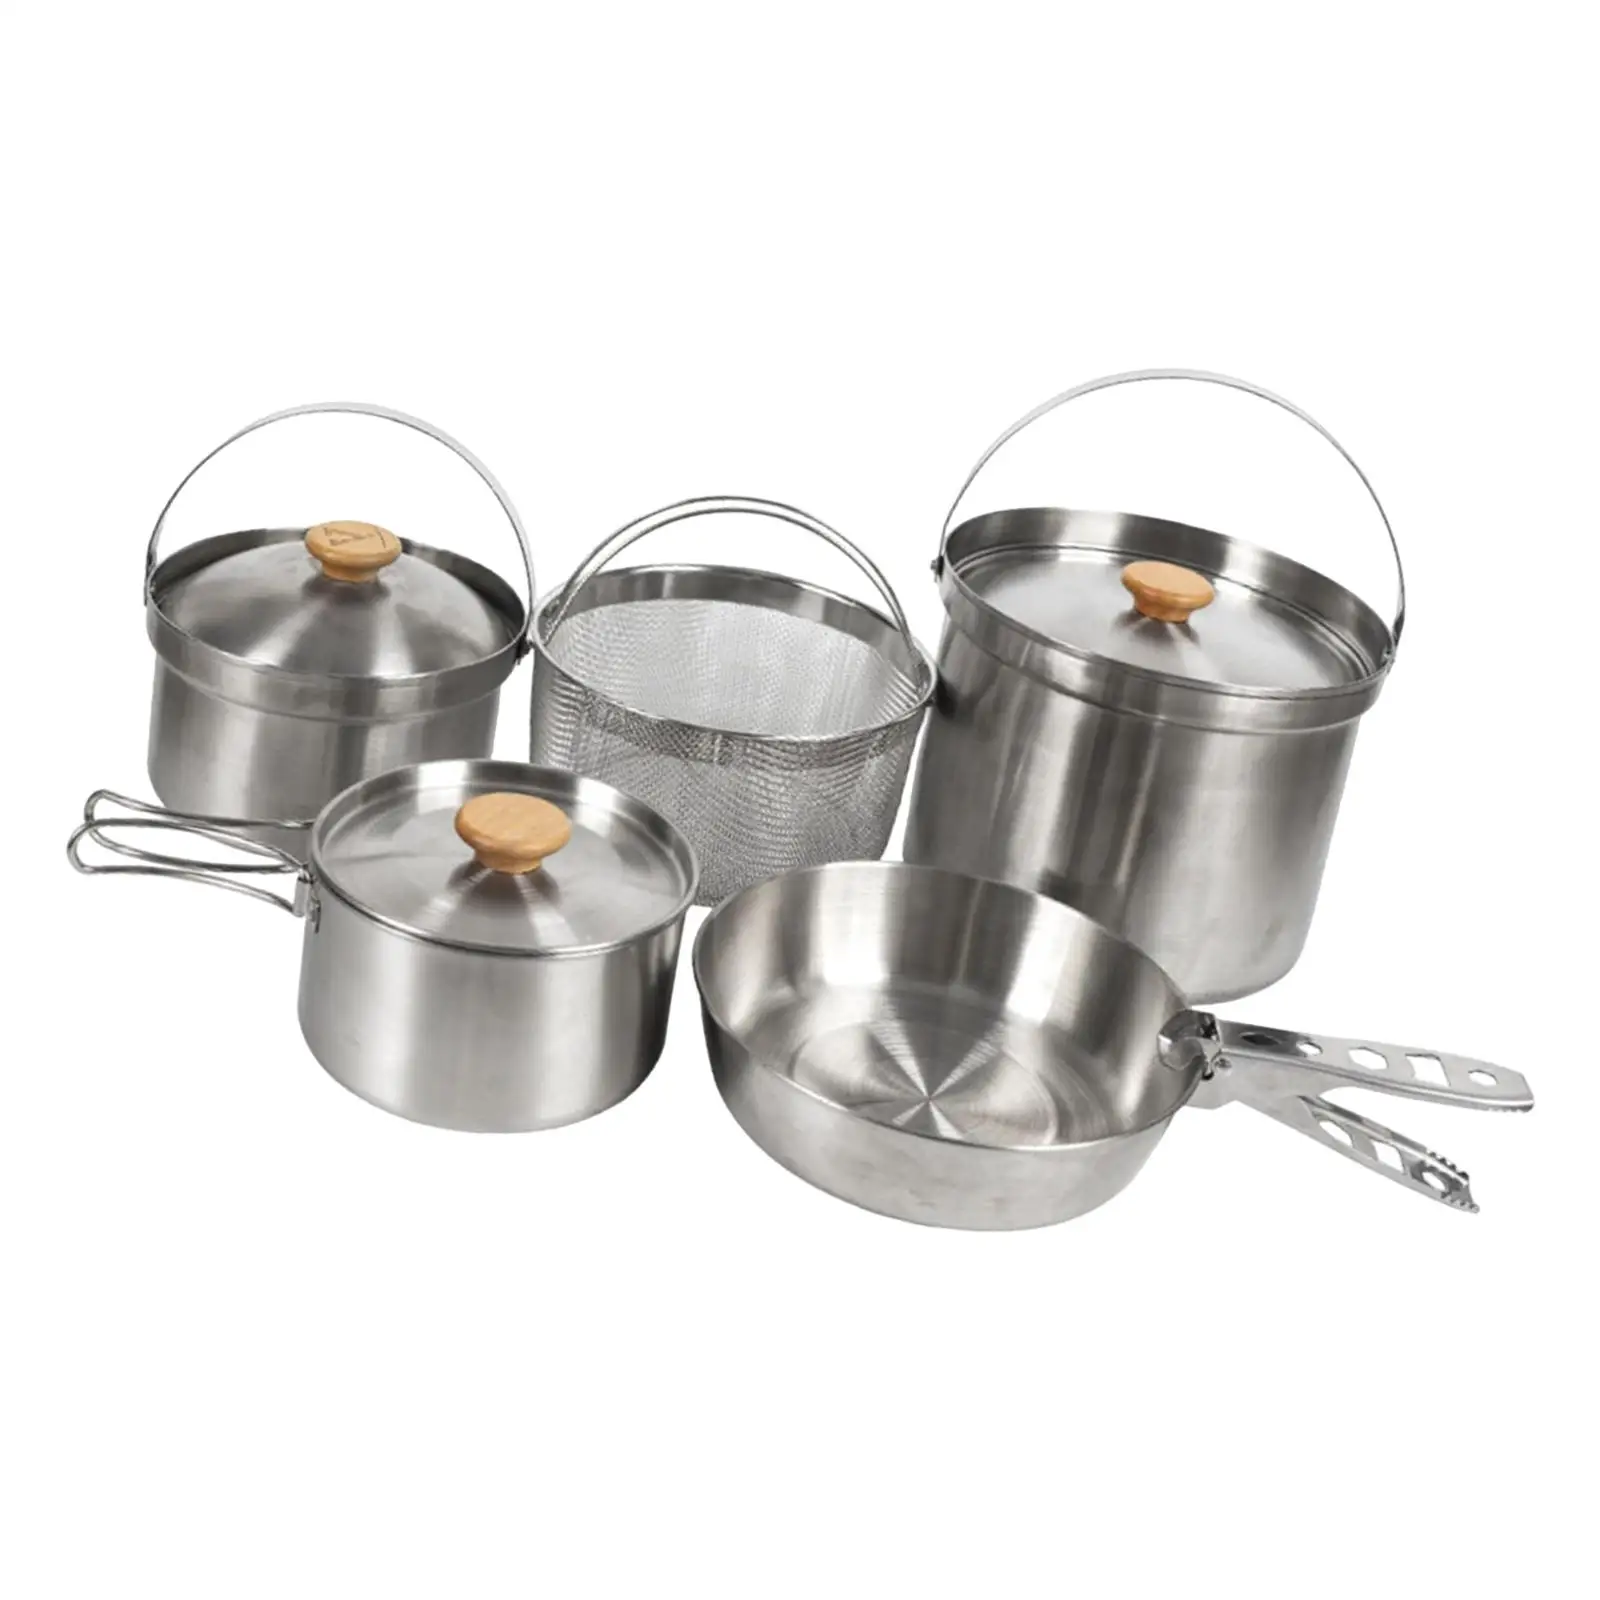 5x Stainless Steel Cooking Pot Set Camping Pan Picnic Tableware BBQ